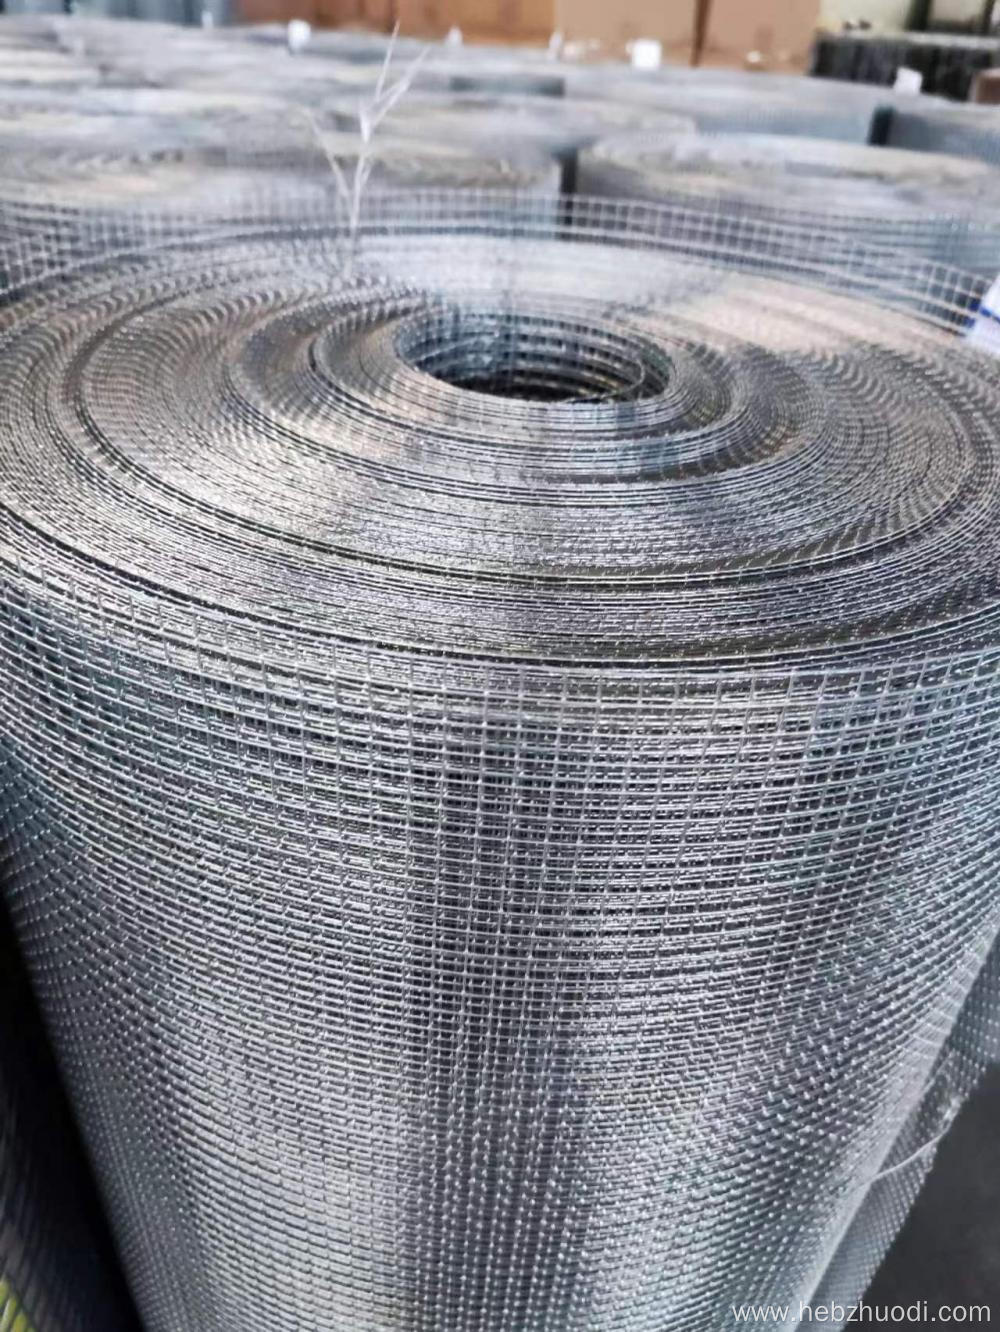 High Quality Pvc Coated Welded Wire Mesh